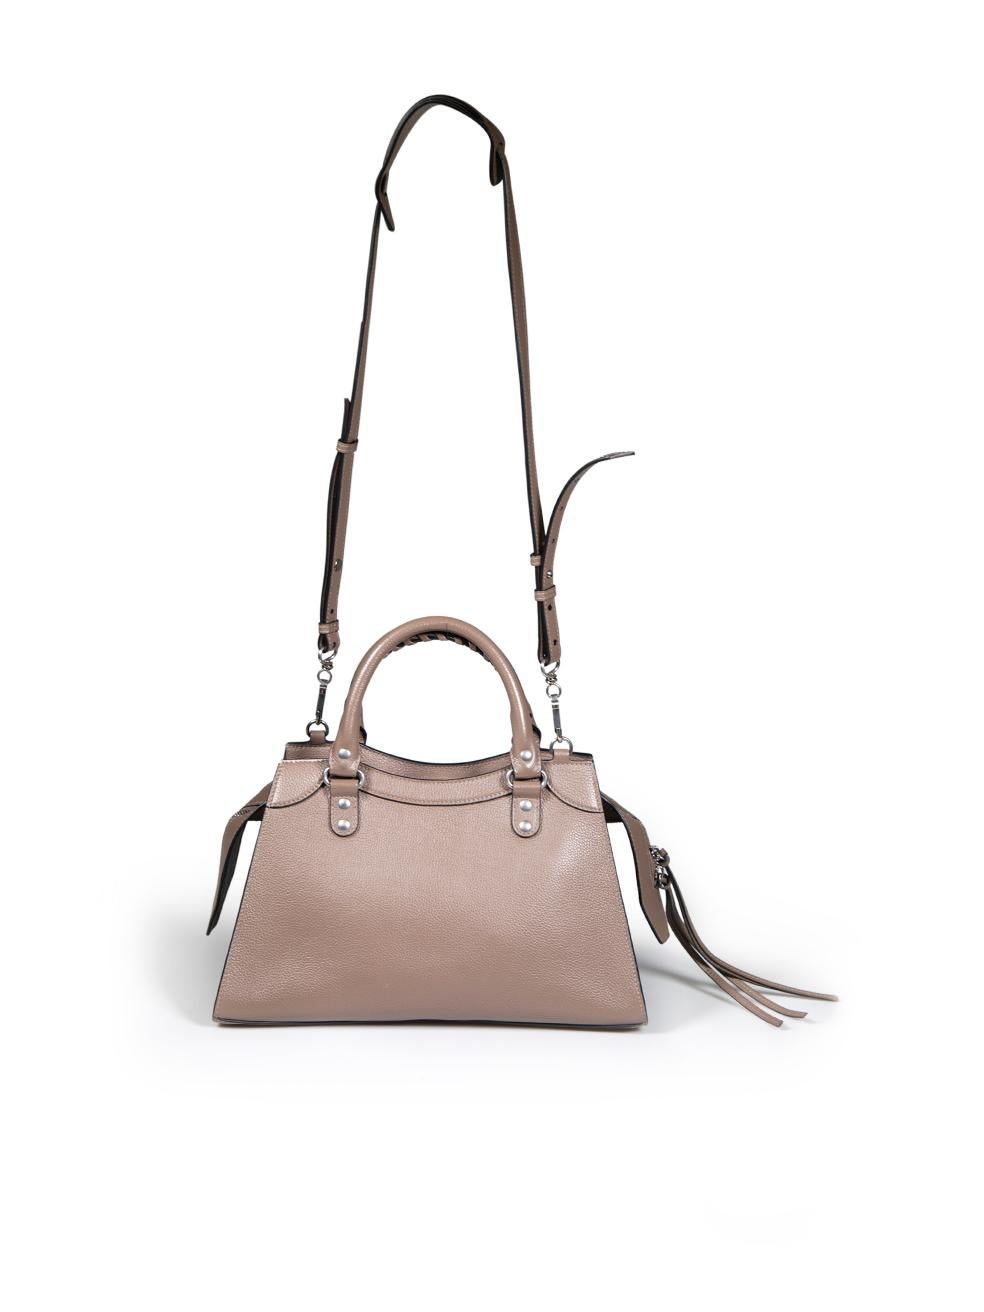 Balenciaga Brown Leather Small Neo Classic City Bag In Good Condition For Sale In London, GB